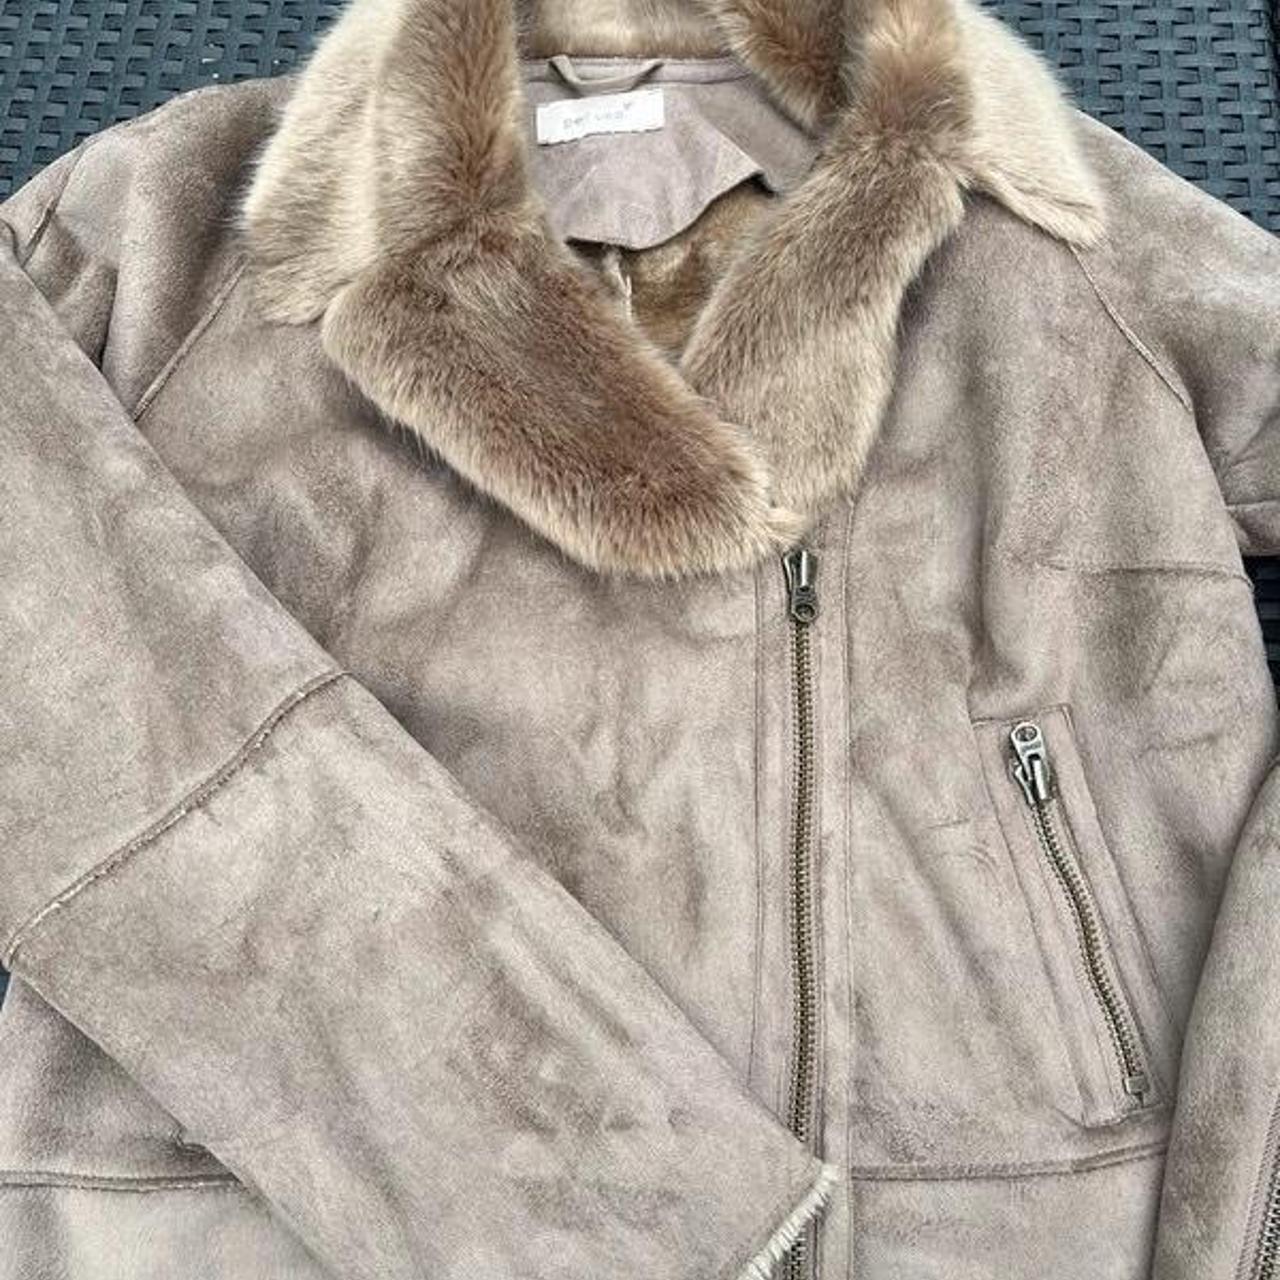 M&S faux fur suede jacket. Has the fur lining all... - Depop